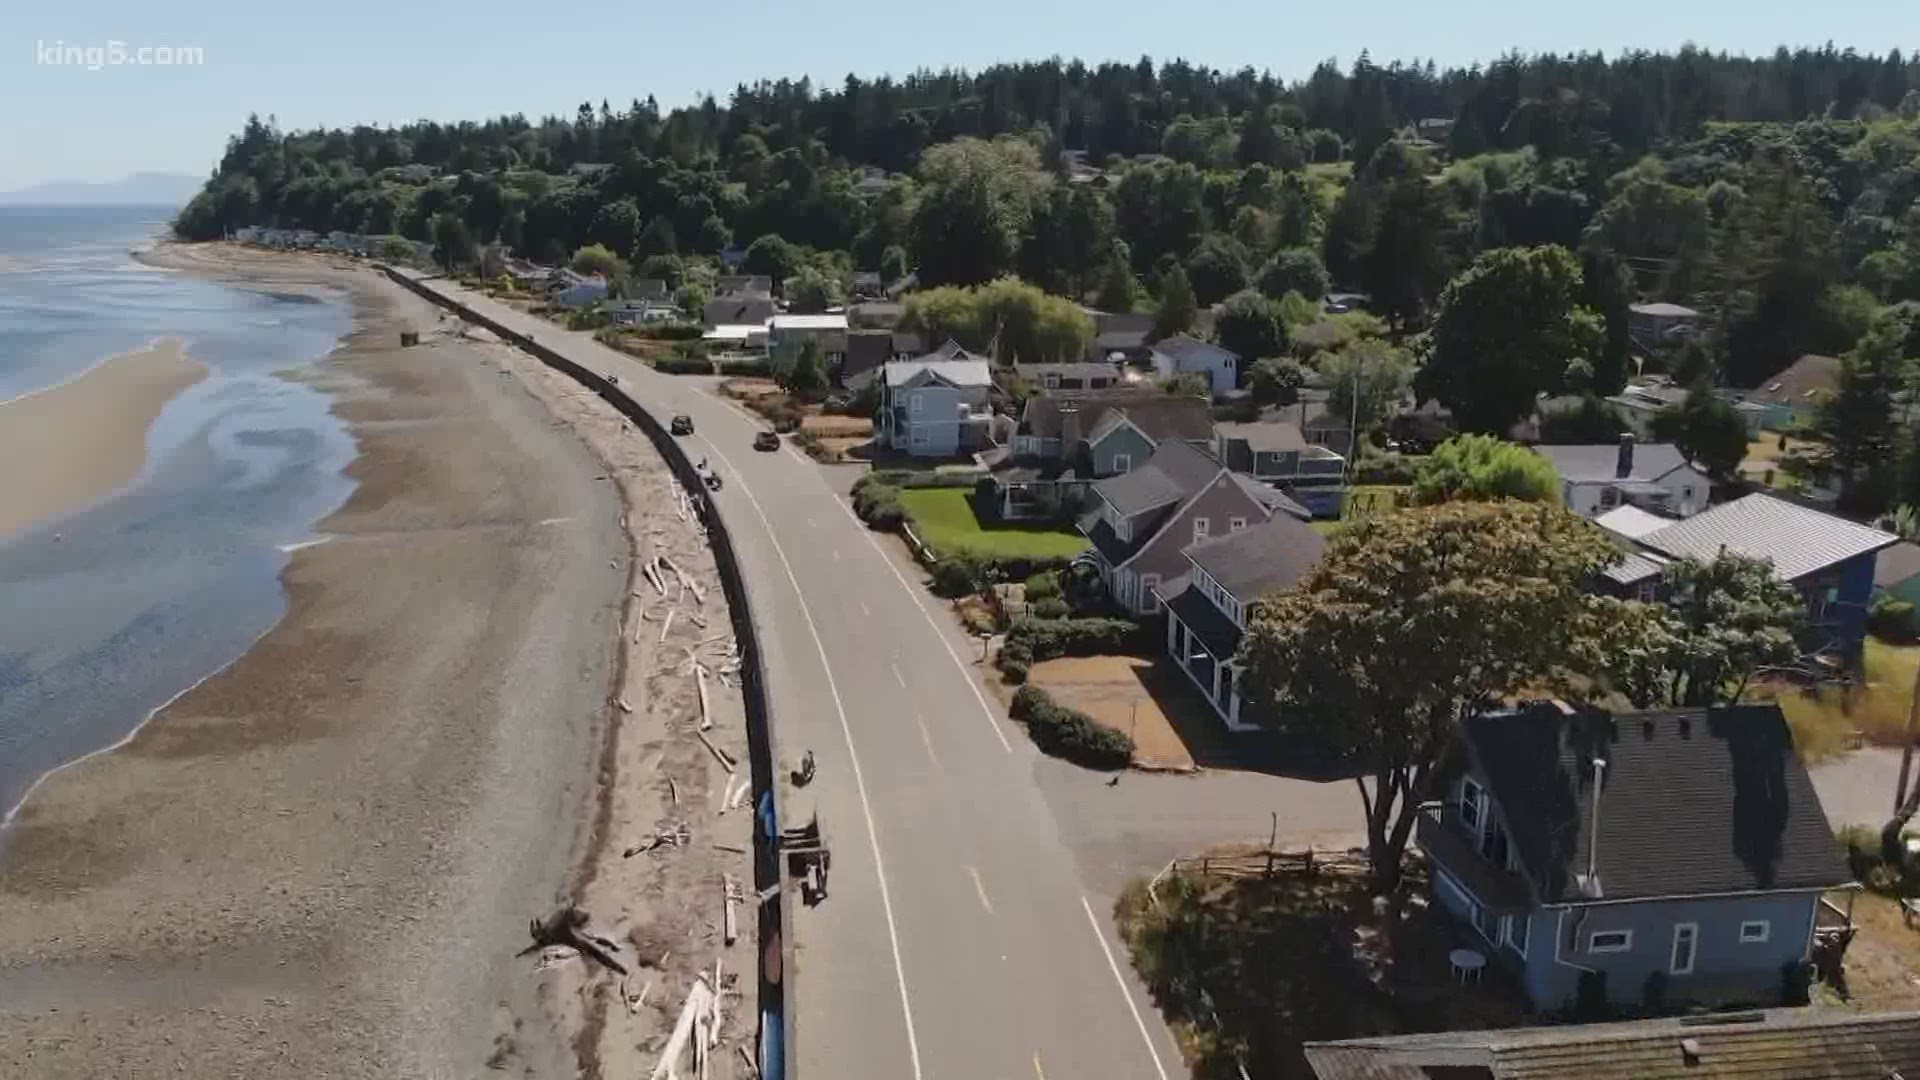 About 1,300 people live in Point Roberts, Washington, which is isolated from the rest of Whatcom County due to unique circumstances.